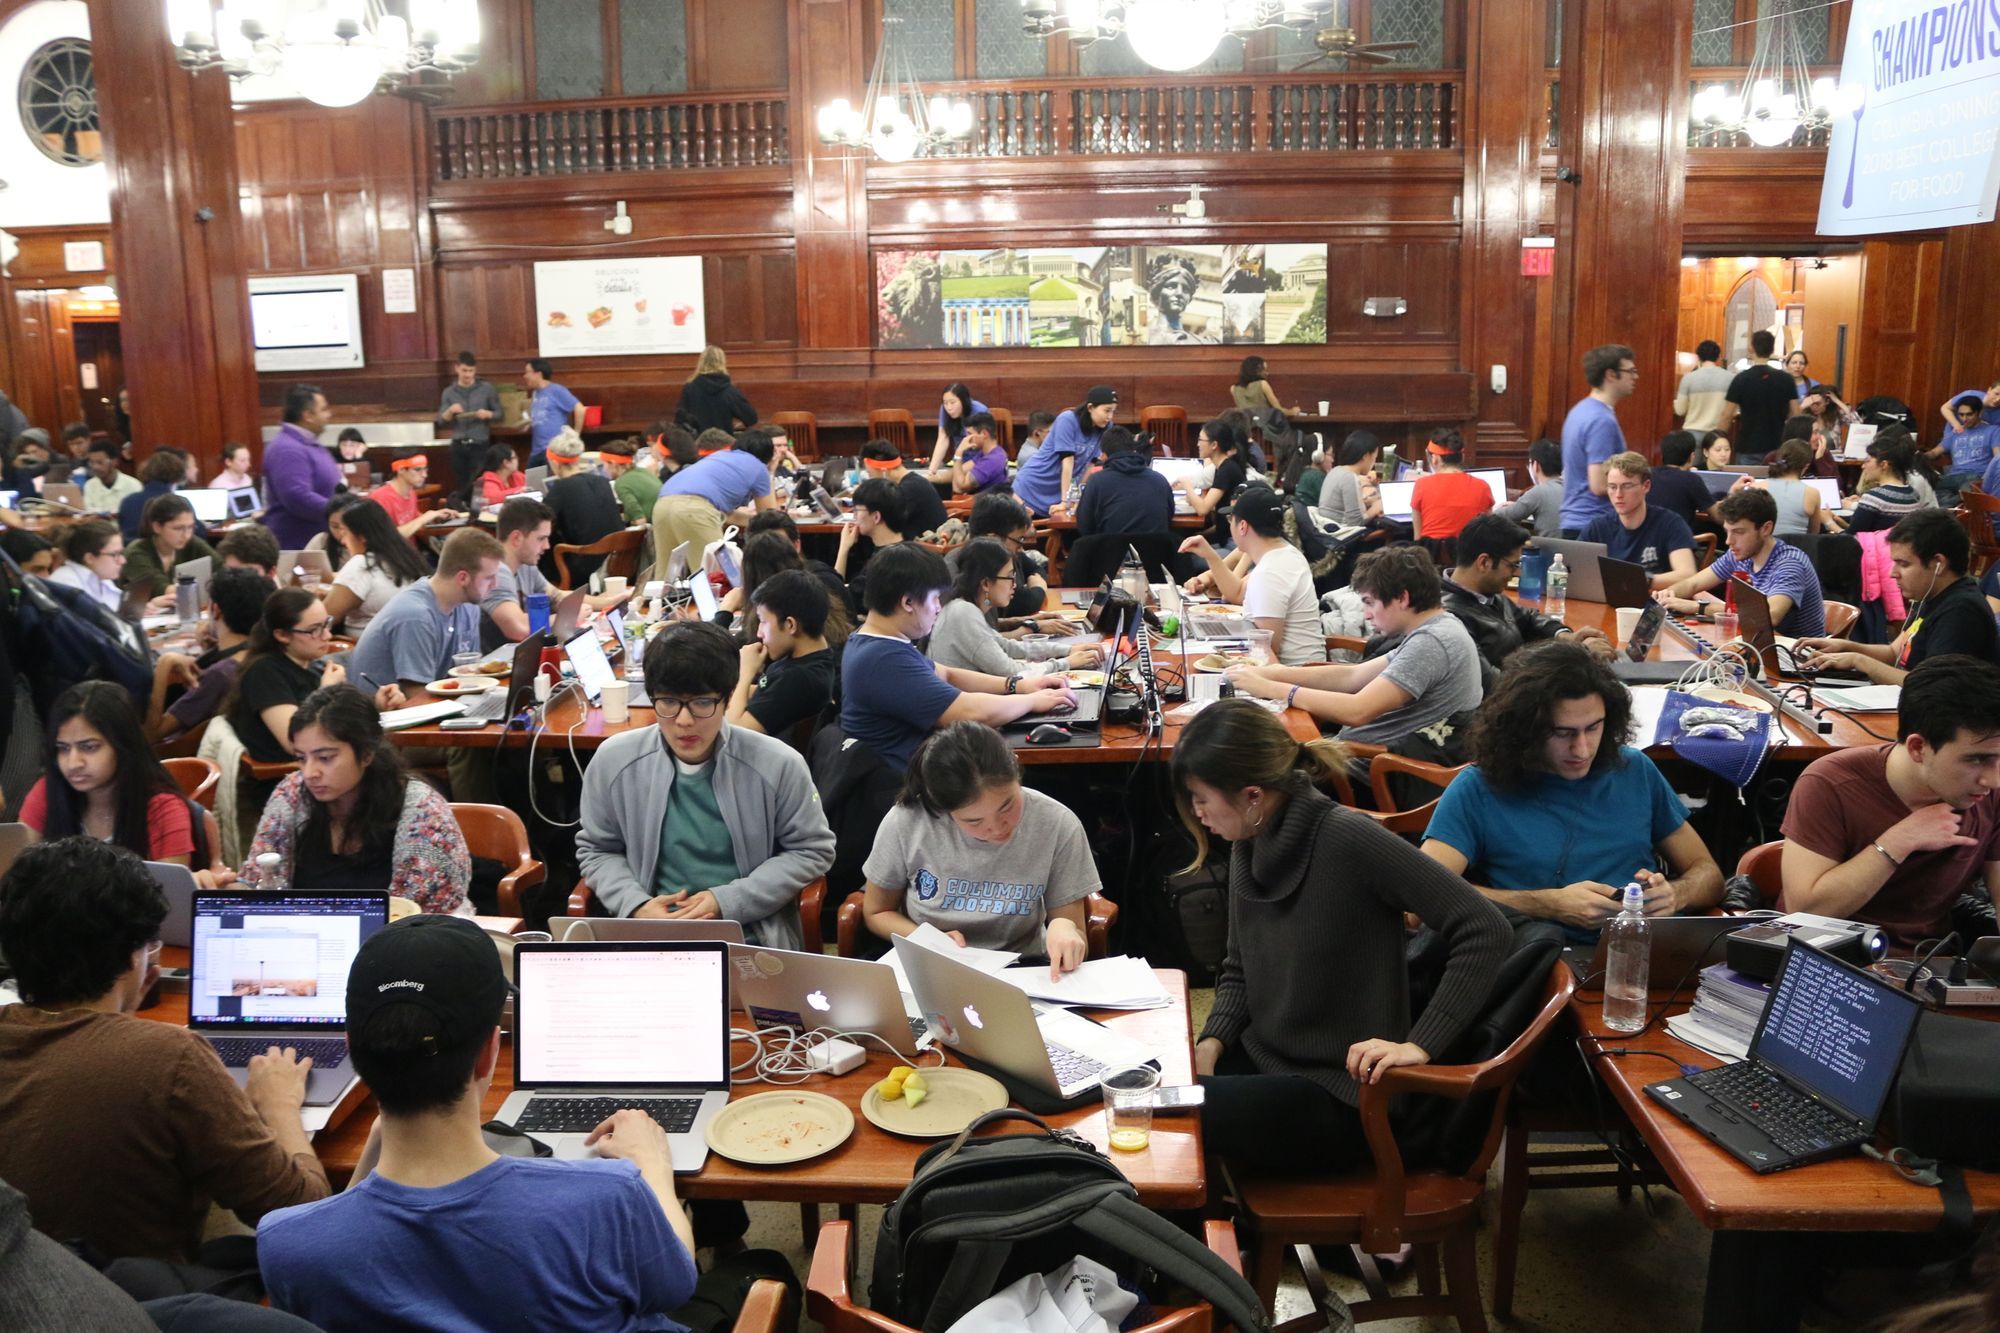 What it took to win a hackathon